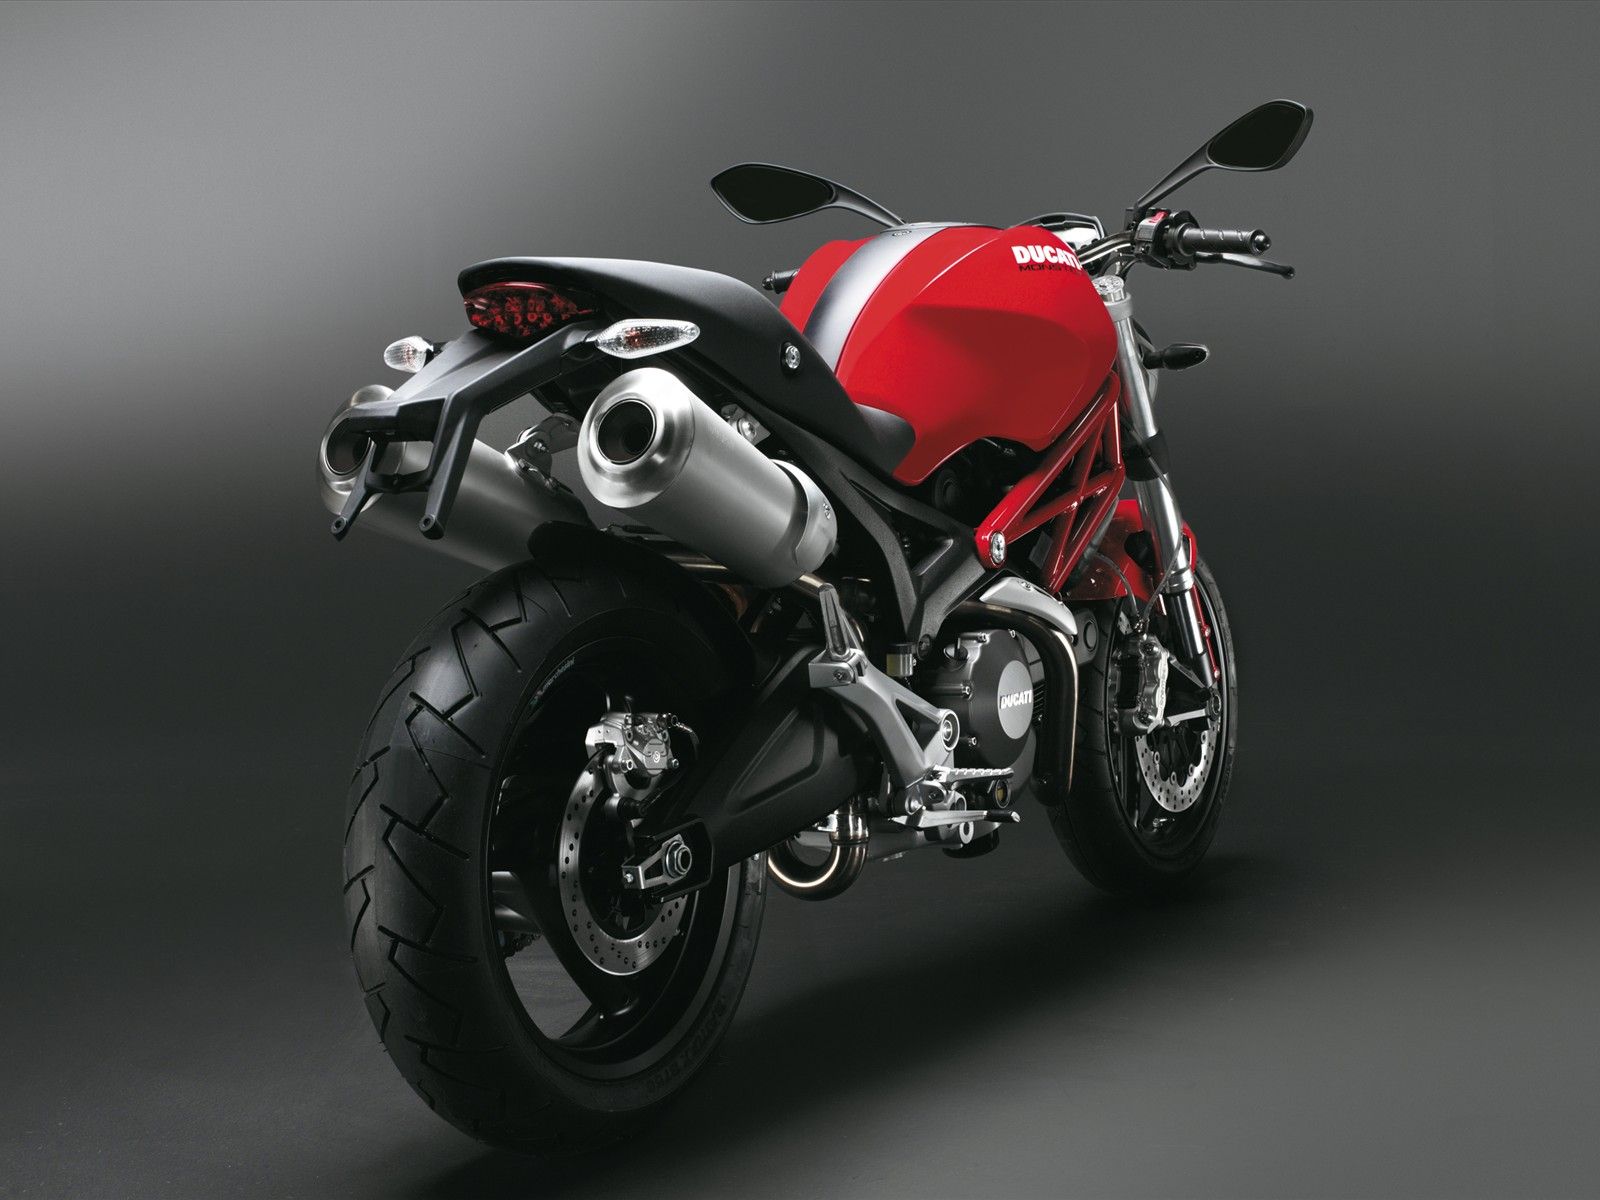 Ducati Monster 696 Red Rear Wallpapers | HD Wallpapers